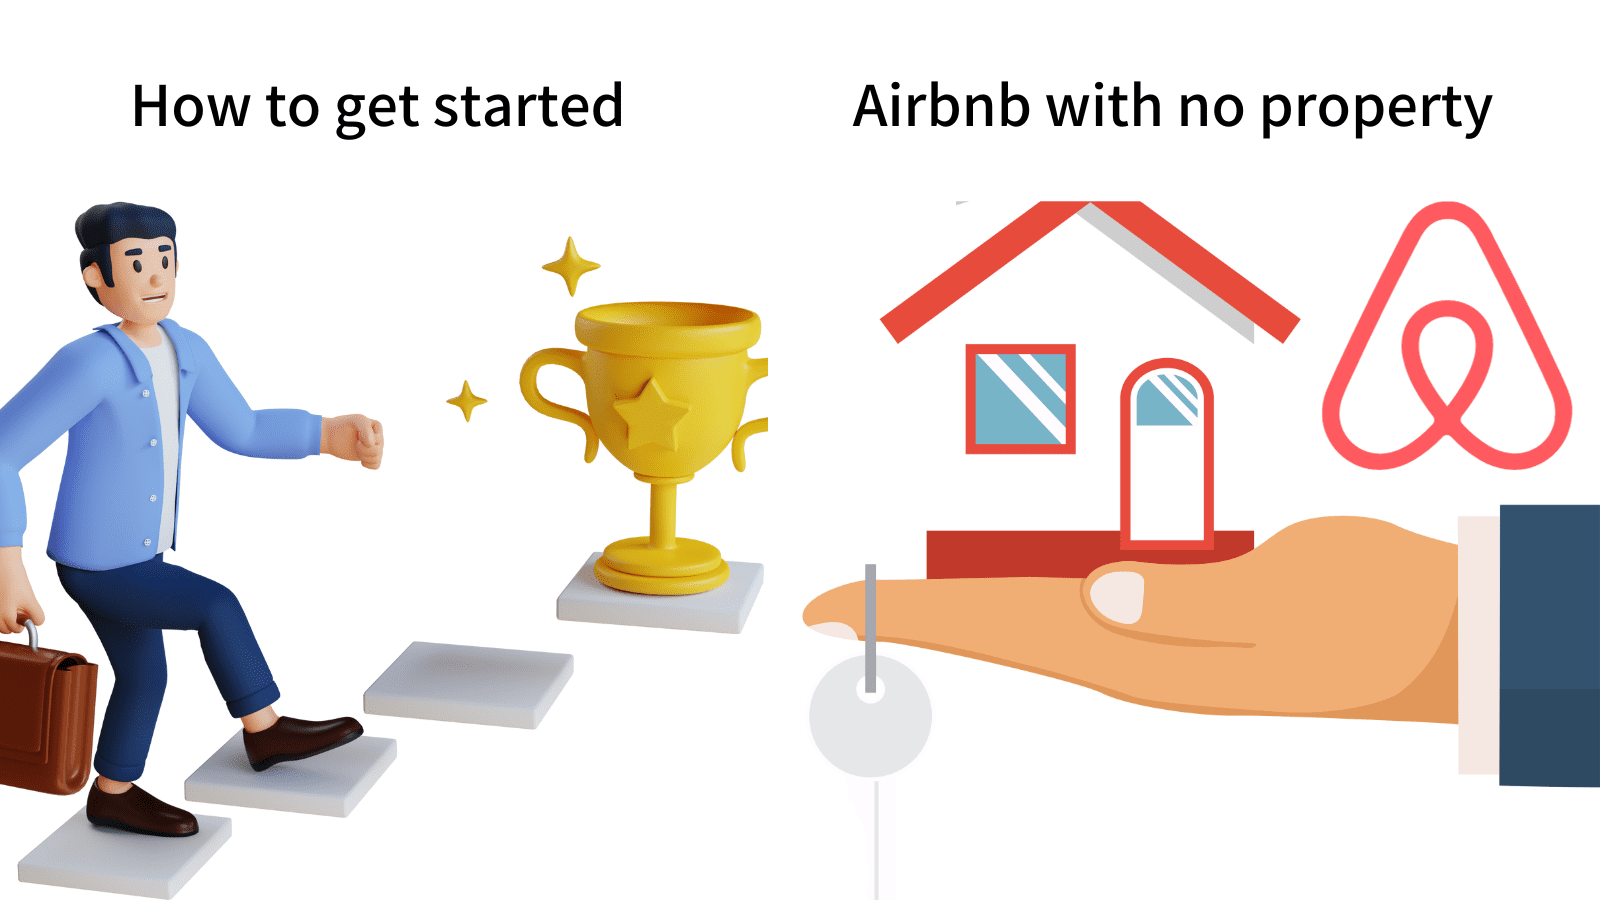 Learn how to get started with airbnb without owning property